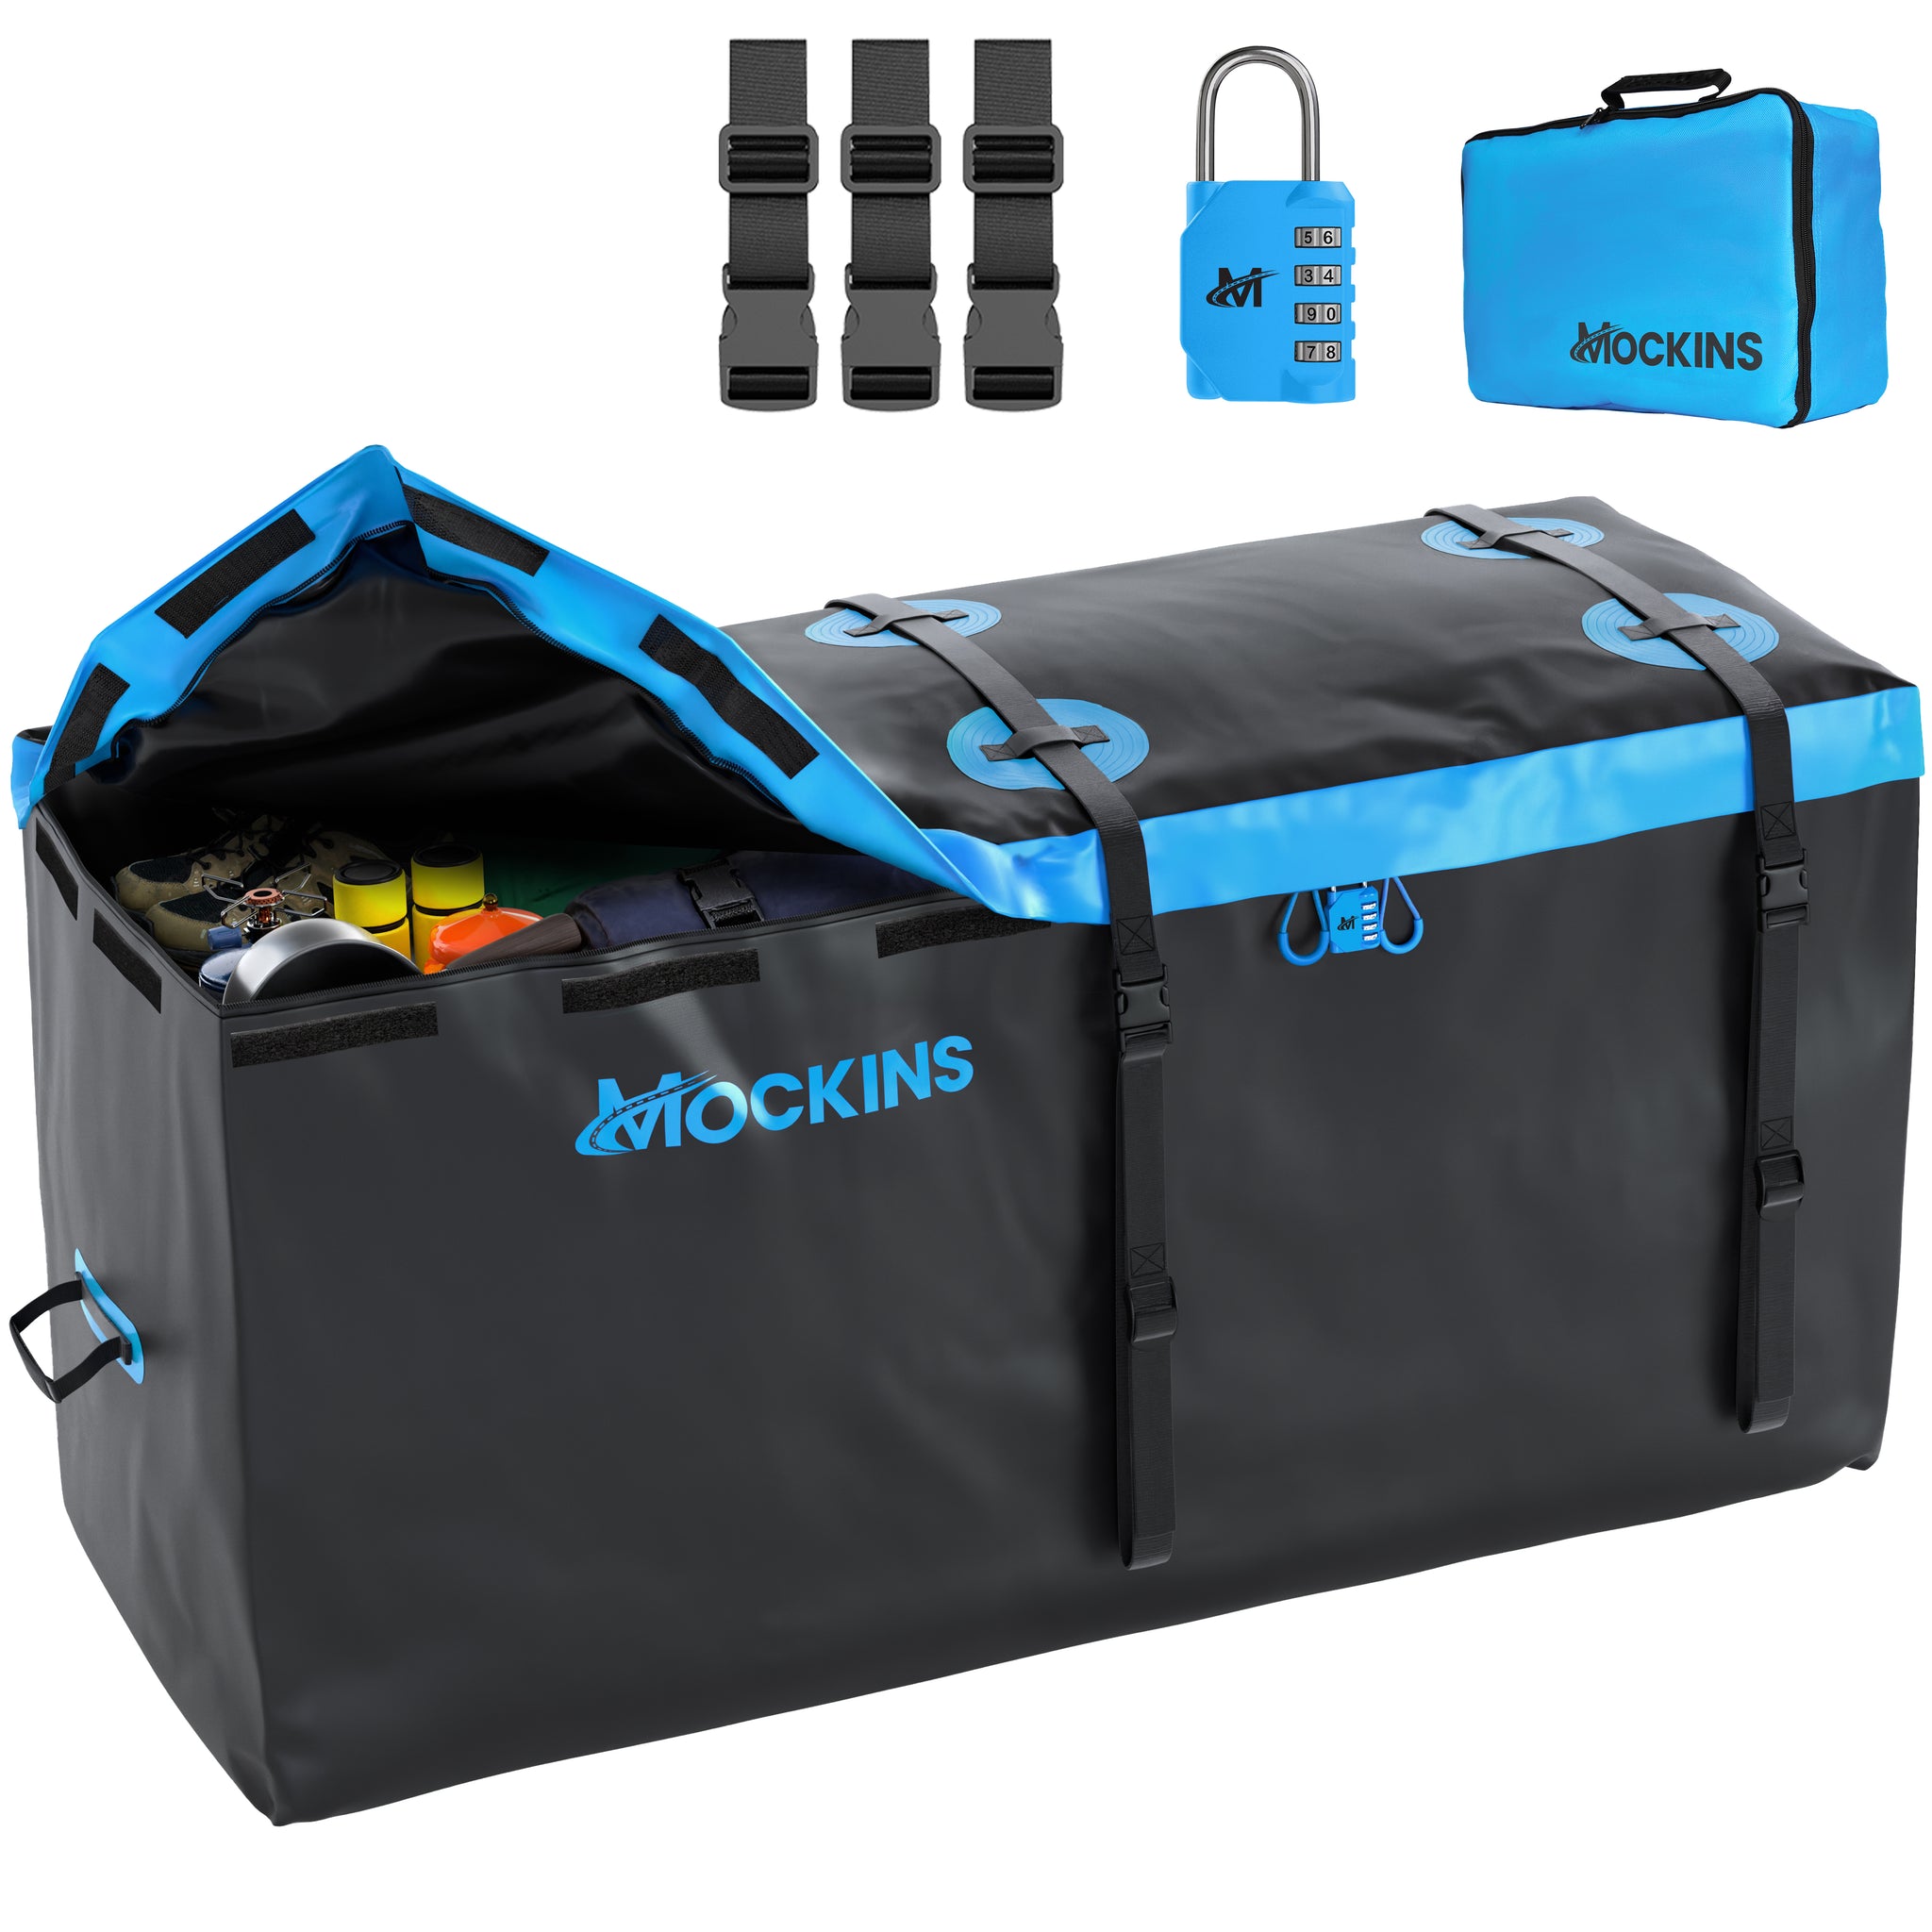 Mockins 25 Cu ft Vehicle Soft-Shell Carriers Waterproof Cargo Bag | 60x31x24 Heavy Duty Trailer Hitch Cargo Carrier Bag Truck Bed Storage | Durable